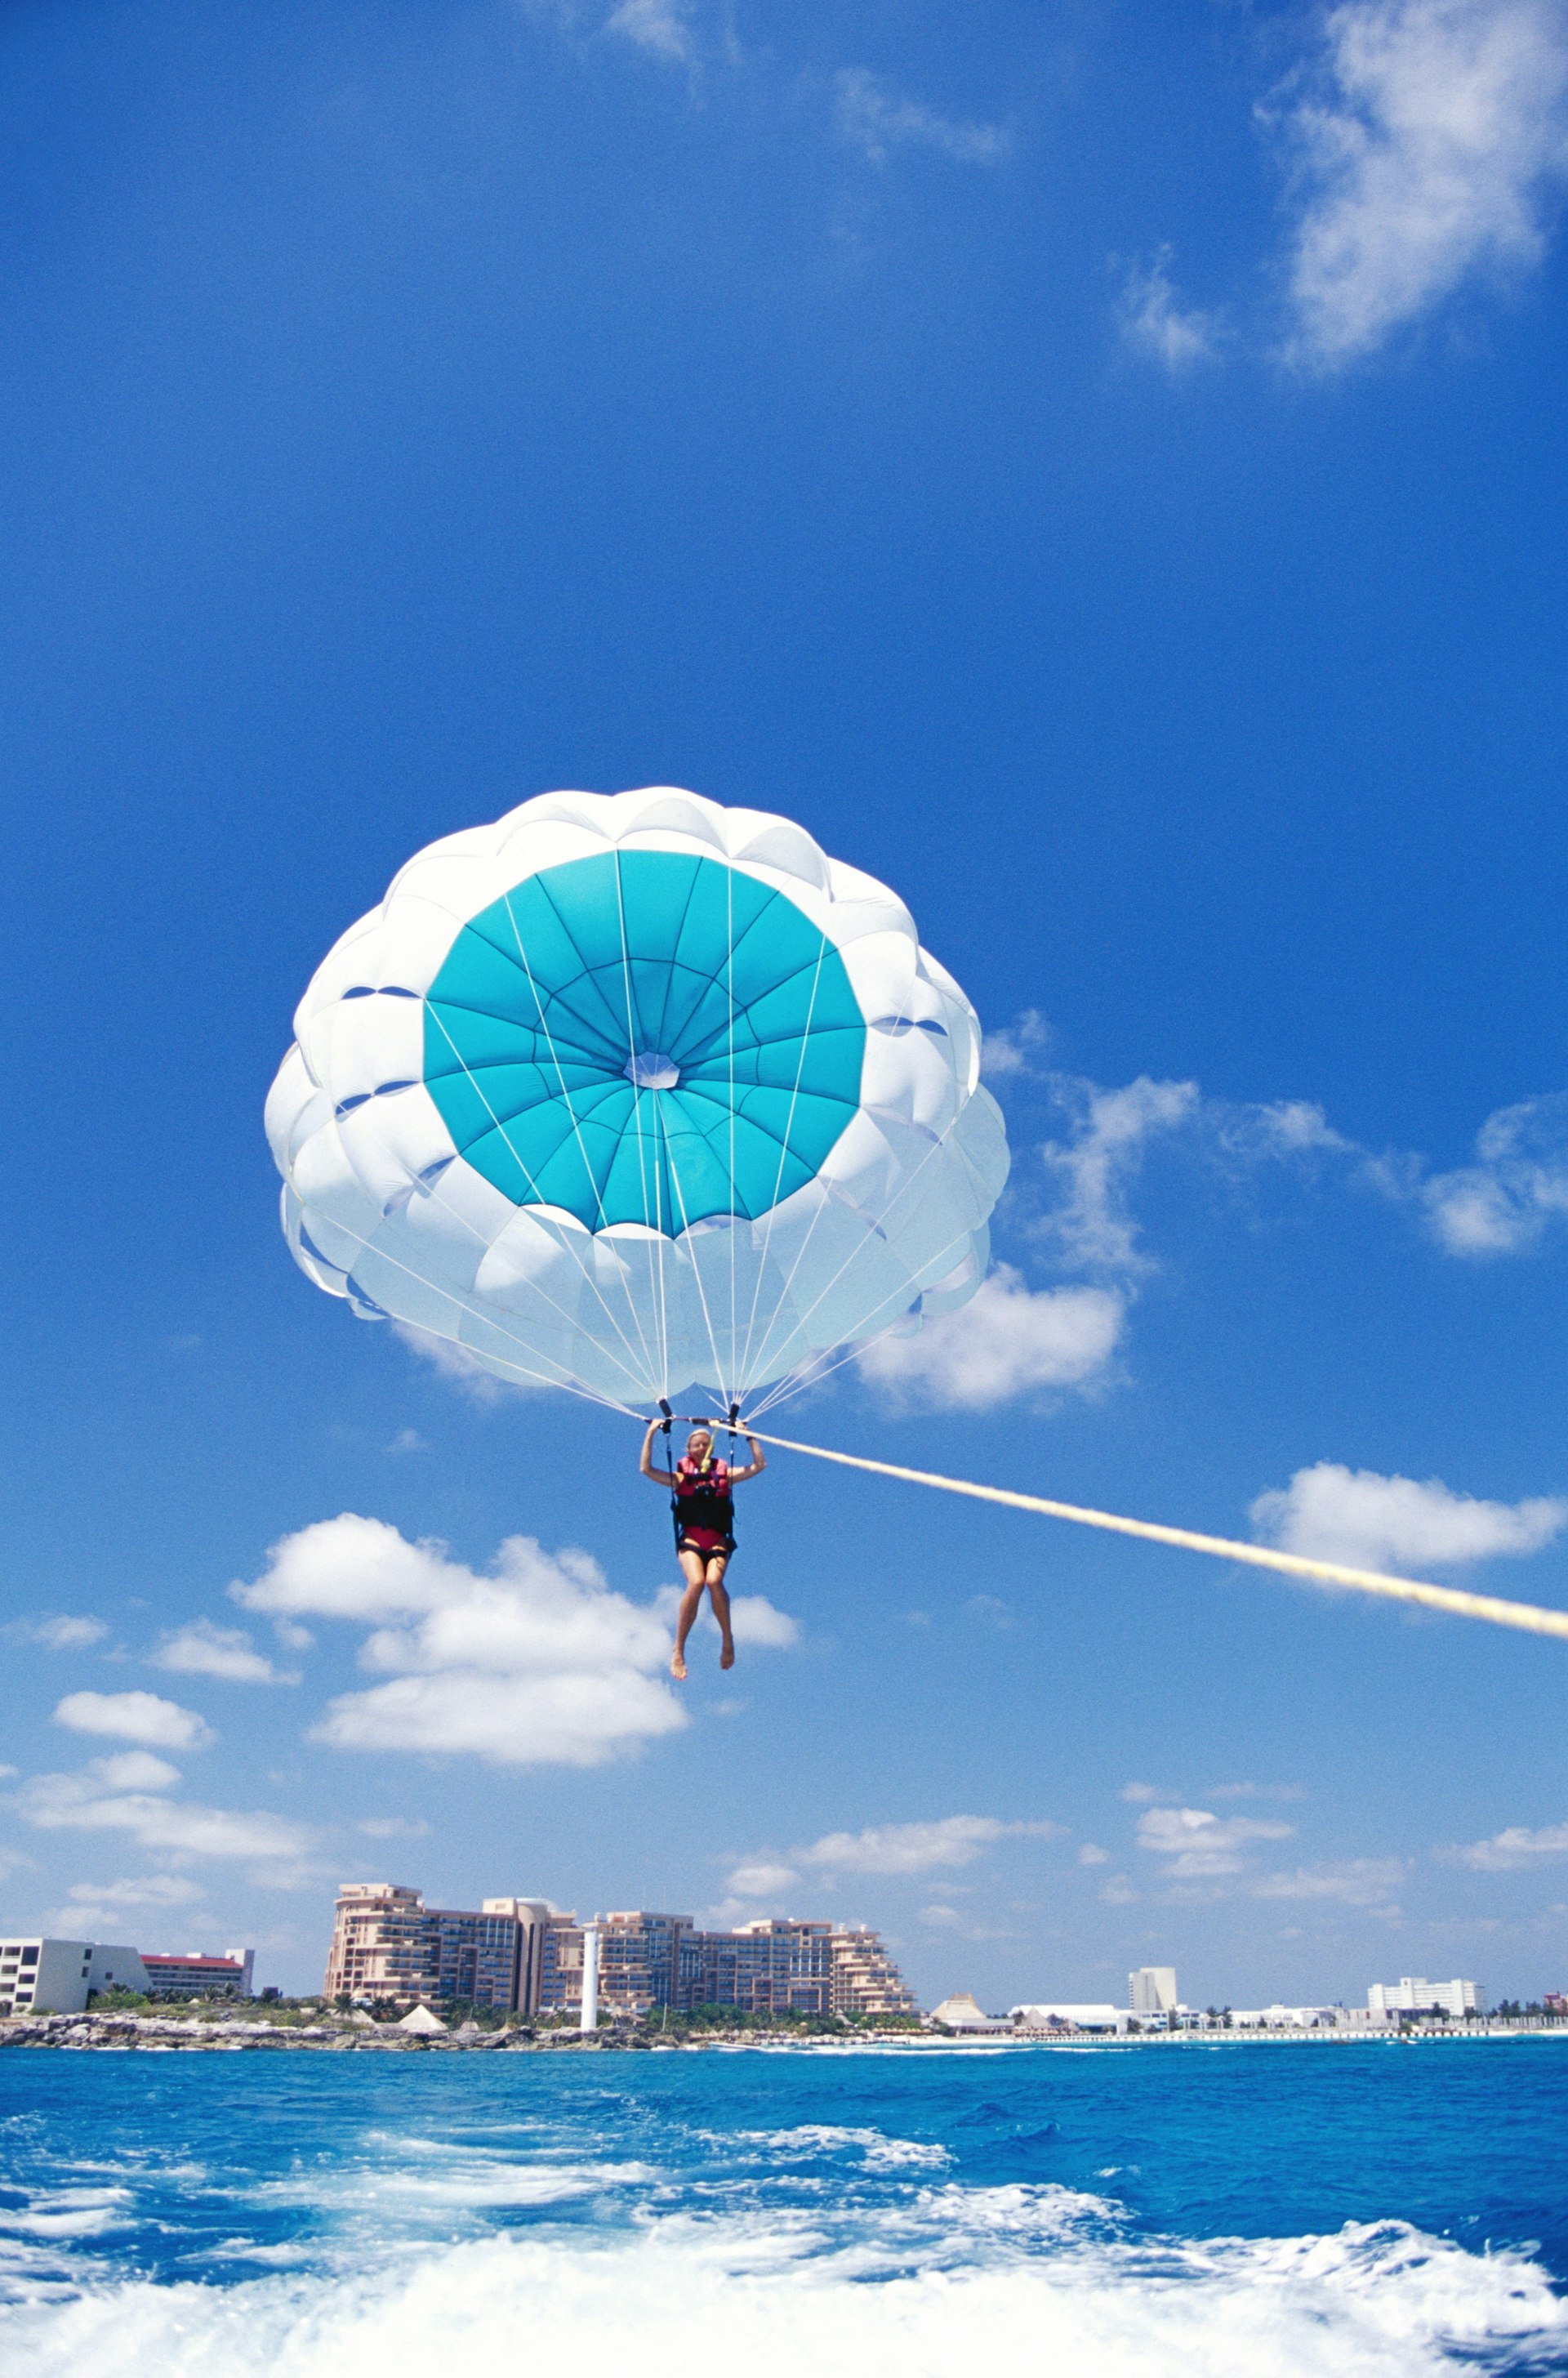 A person attached to a parachute flies high above the ocean towed by a boat